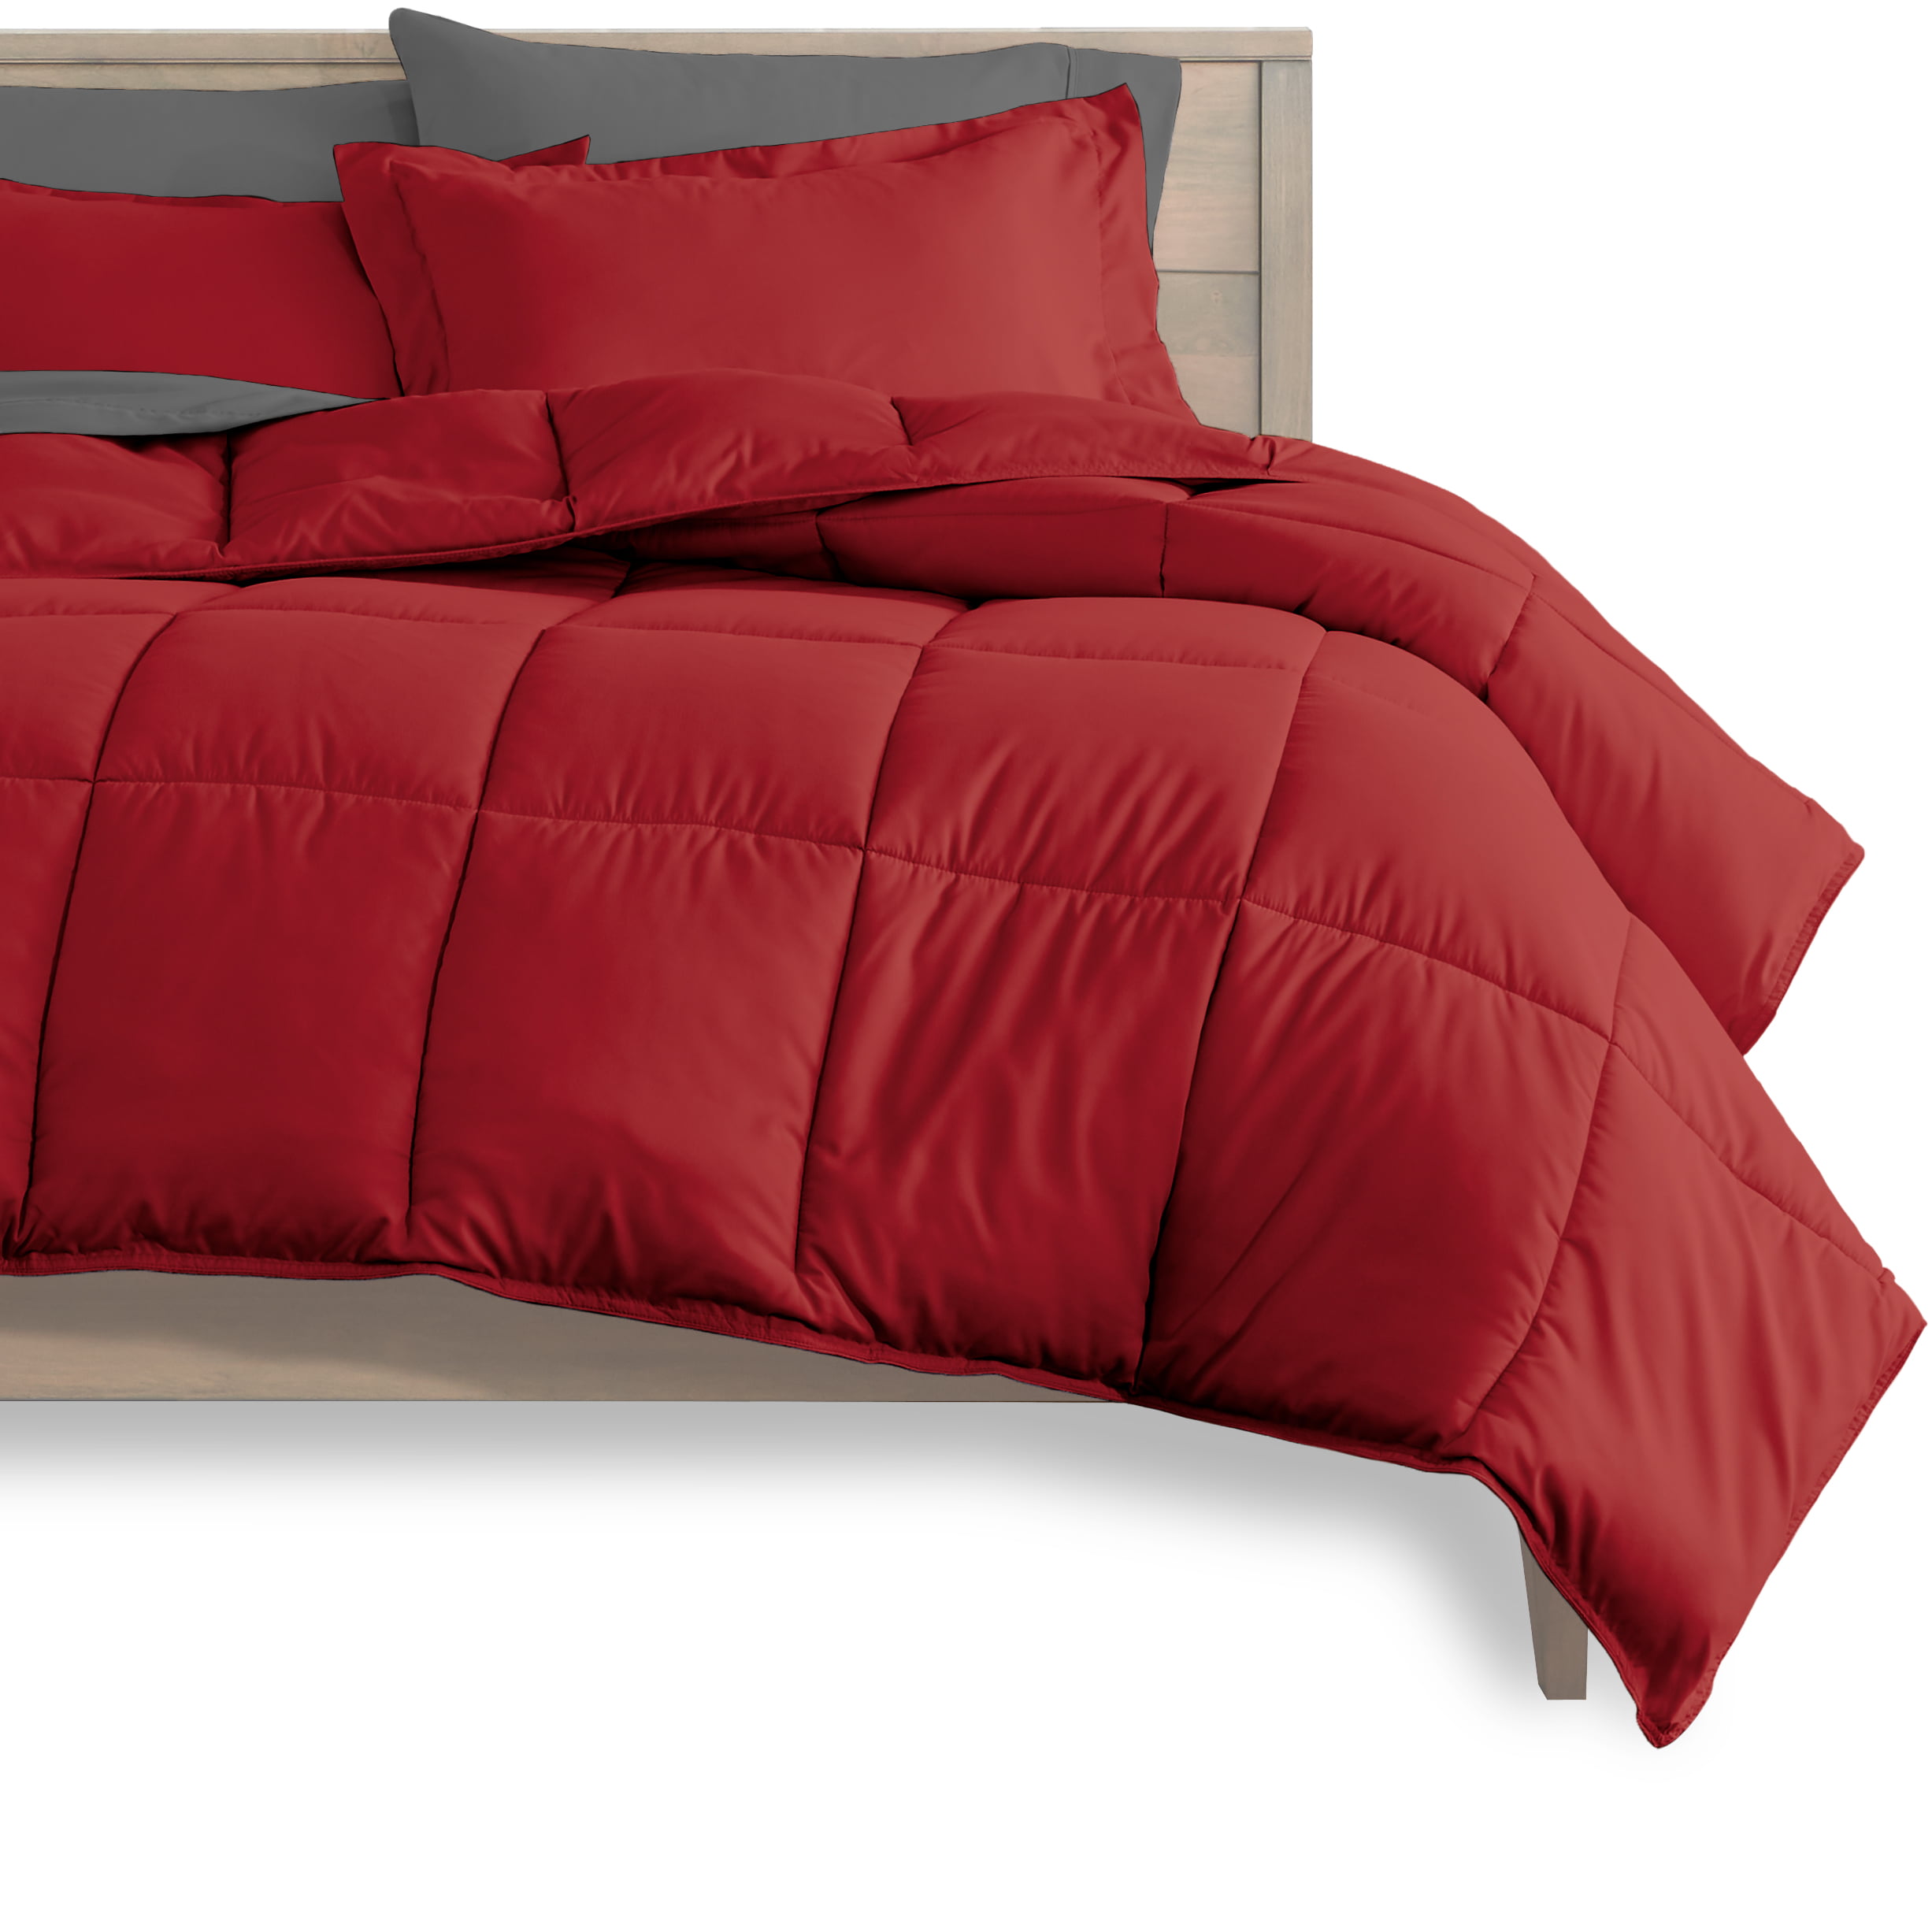 King Comforter Set, Red And Black Bed In A Bag King